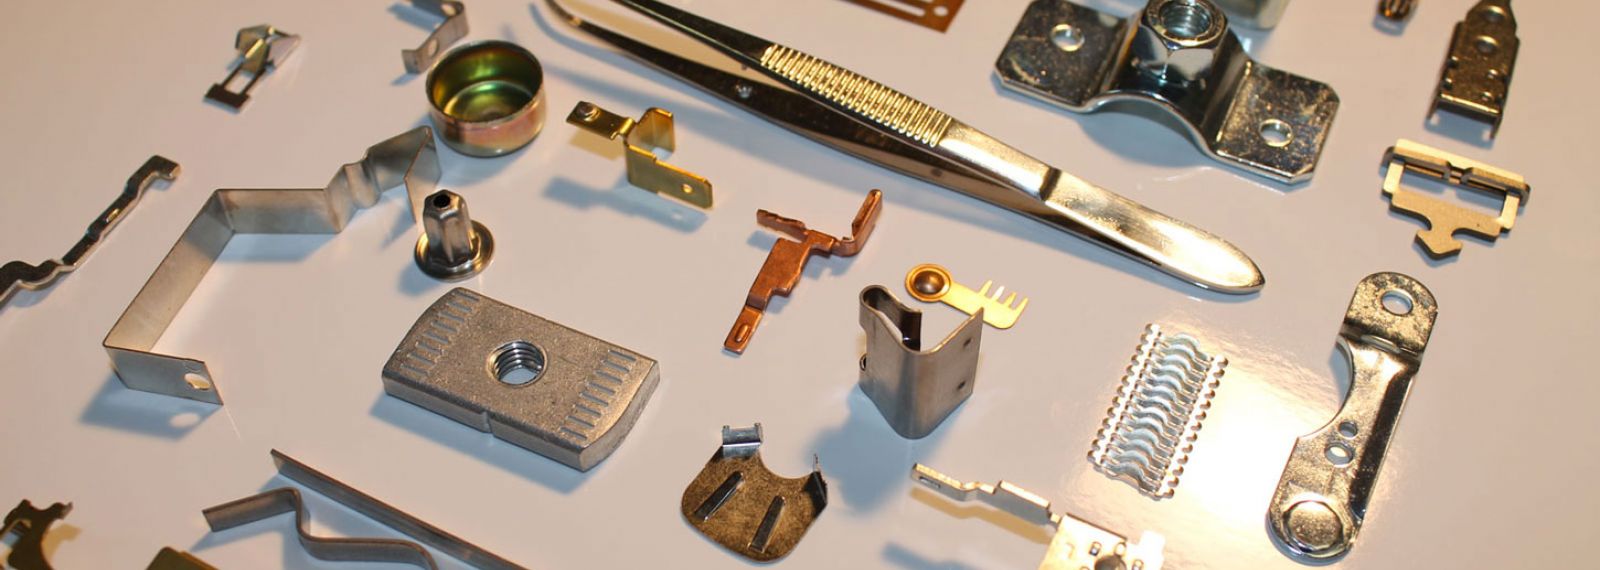 Small components manufactured